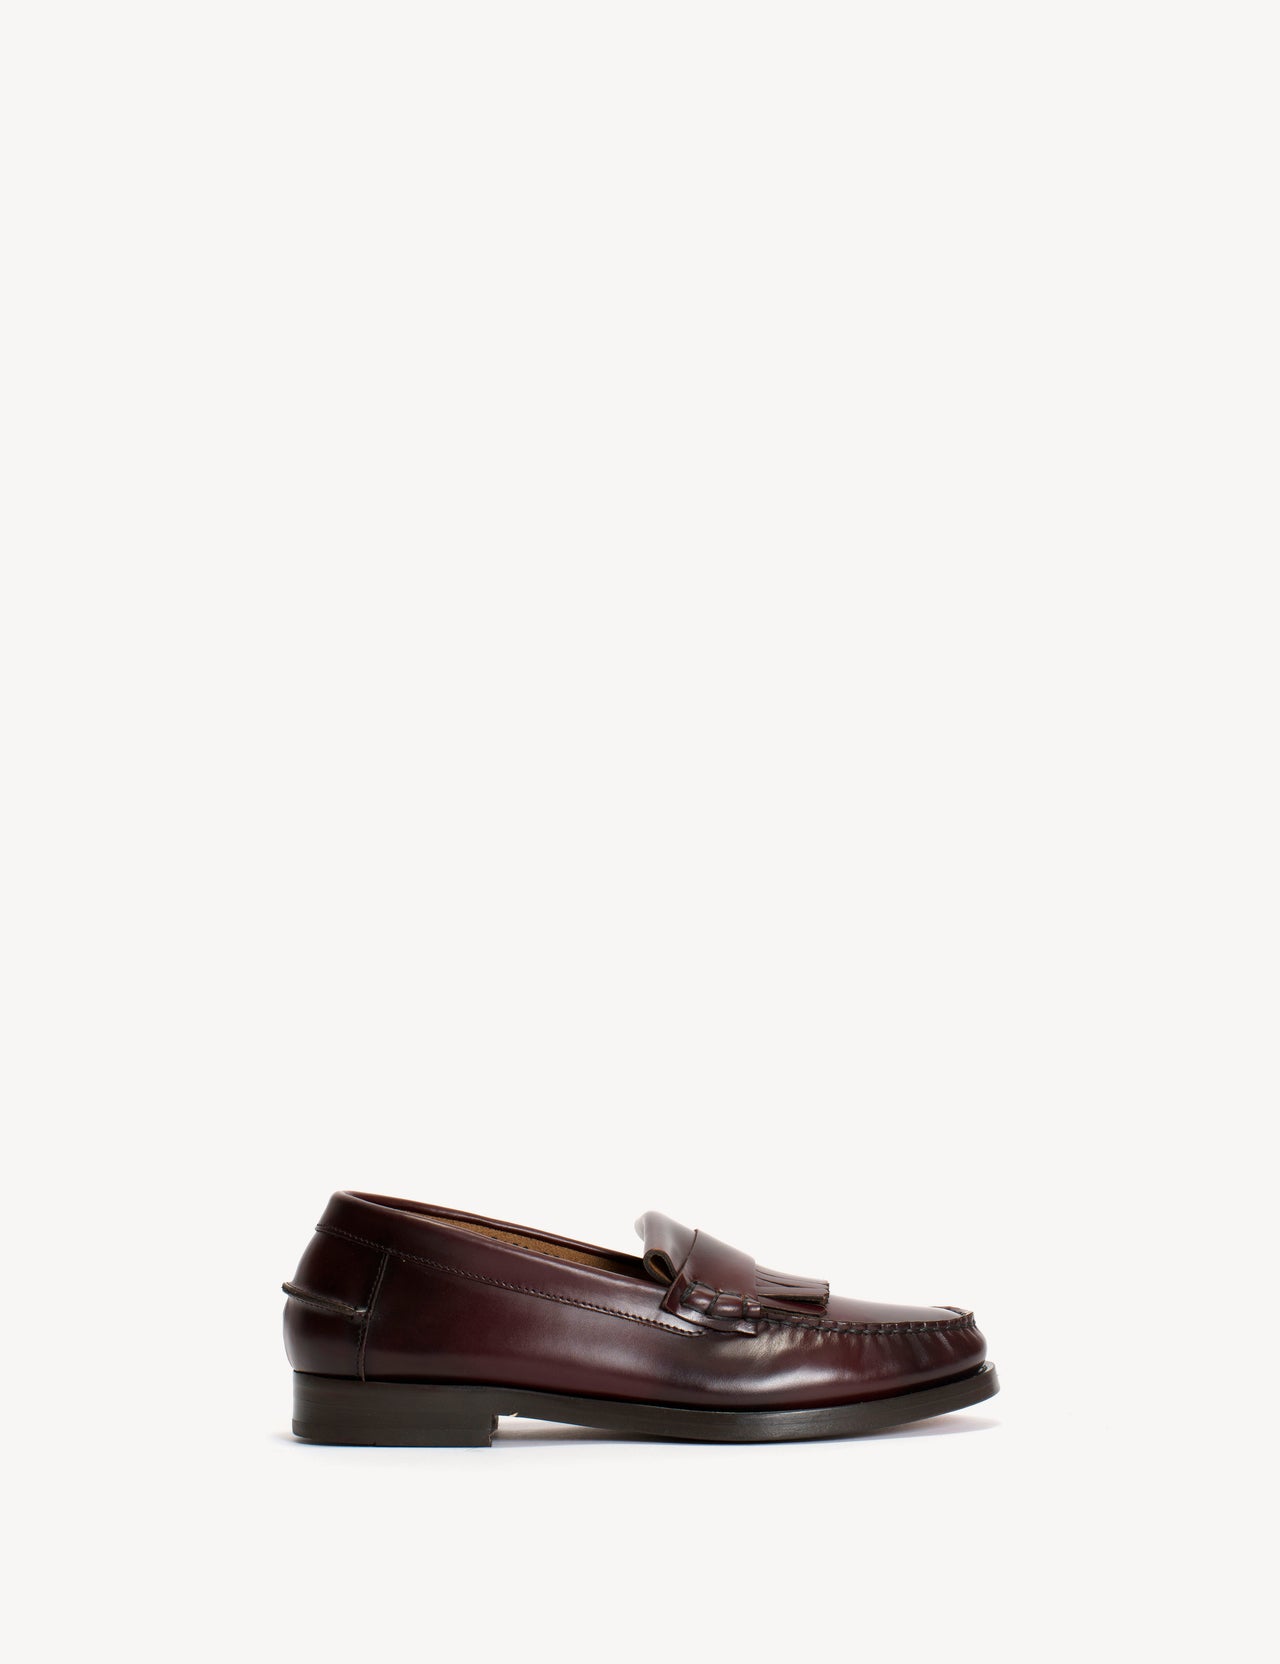 Moccasin Loafer With Fringes In Bordeaux Polido Leather